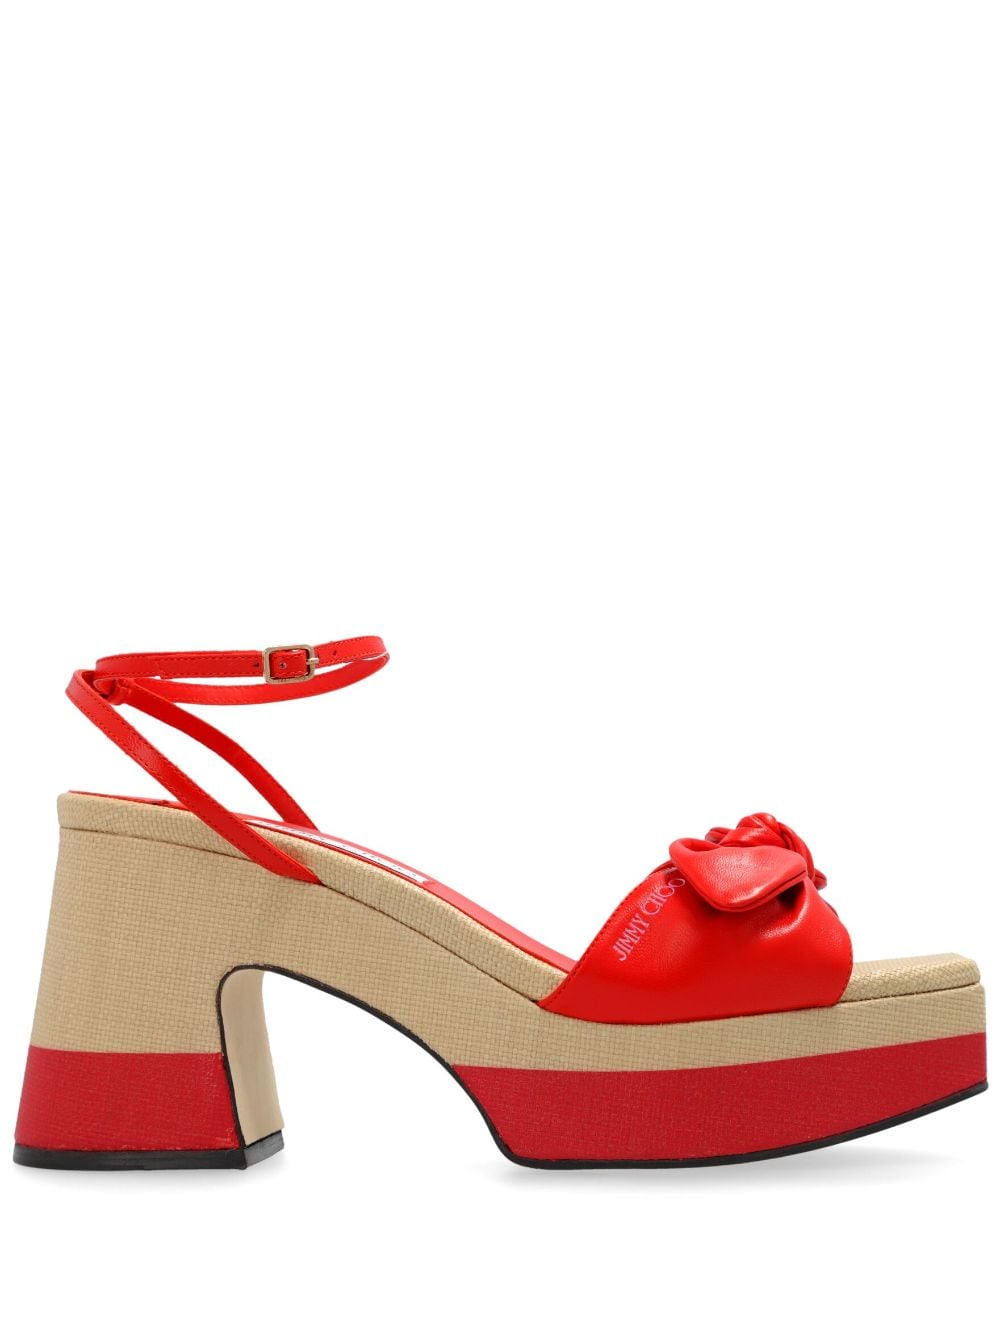 Jimmy Choo Ricia Knotted Bow Platform Sandals In Red